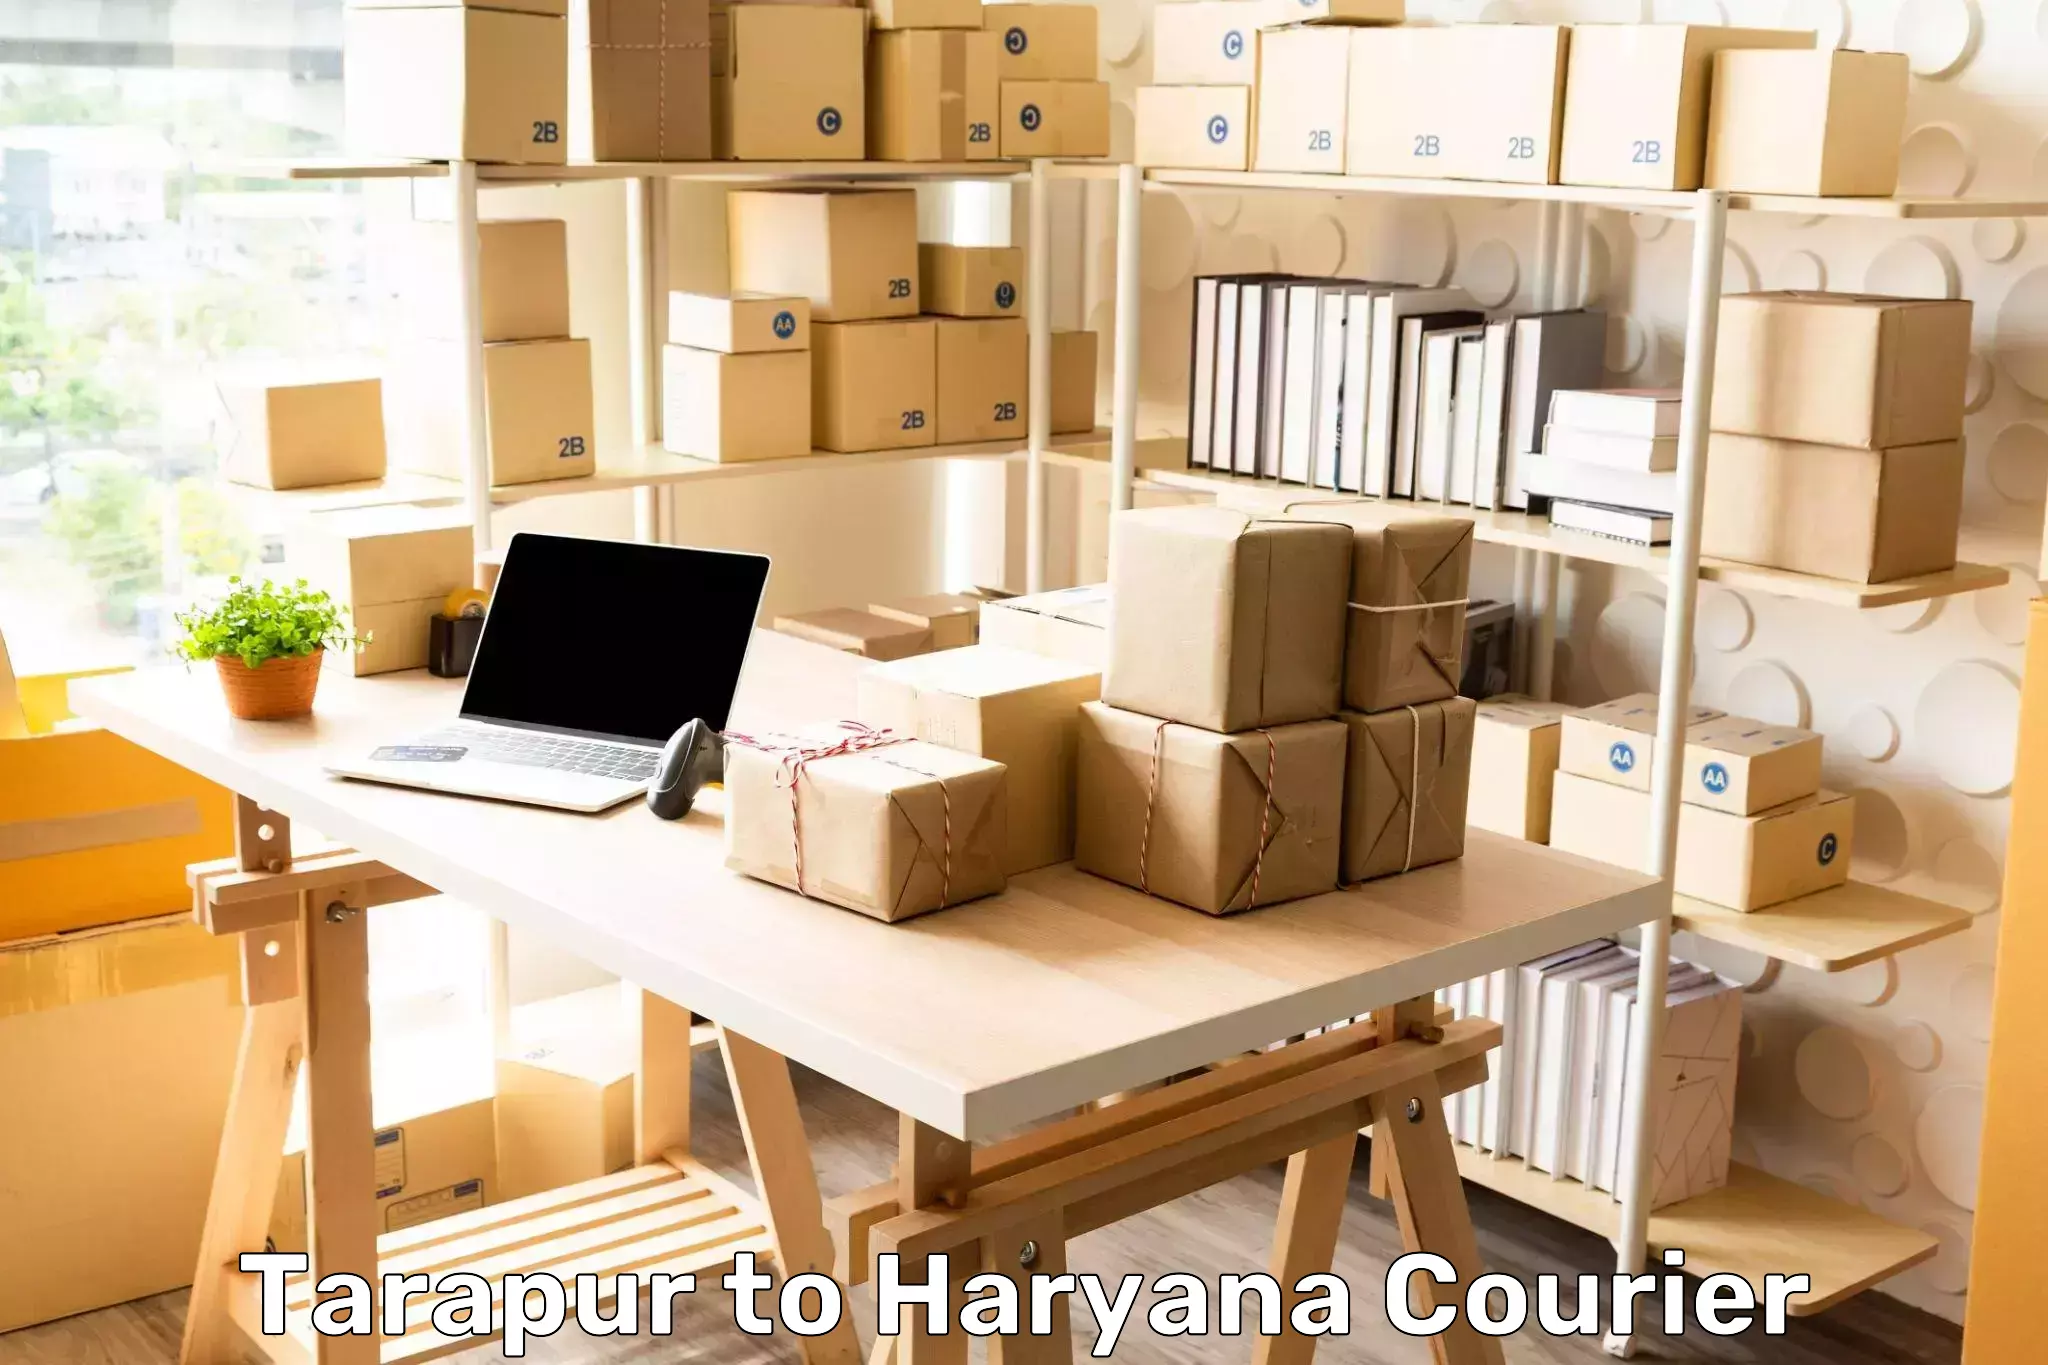 Dynamic courier operations Tarapur to Panipat